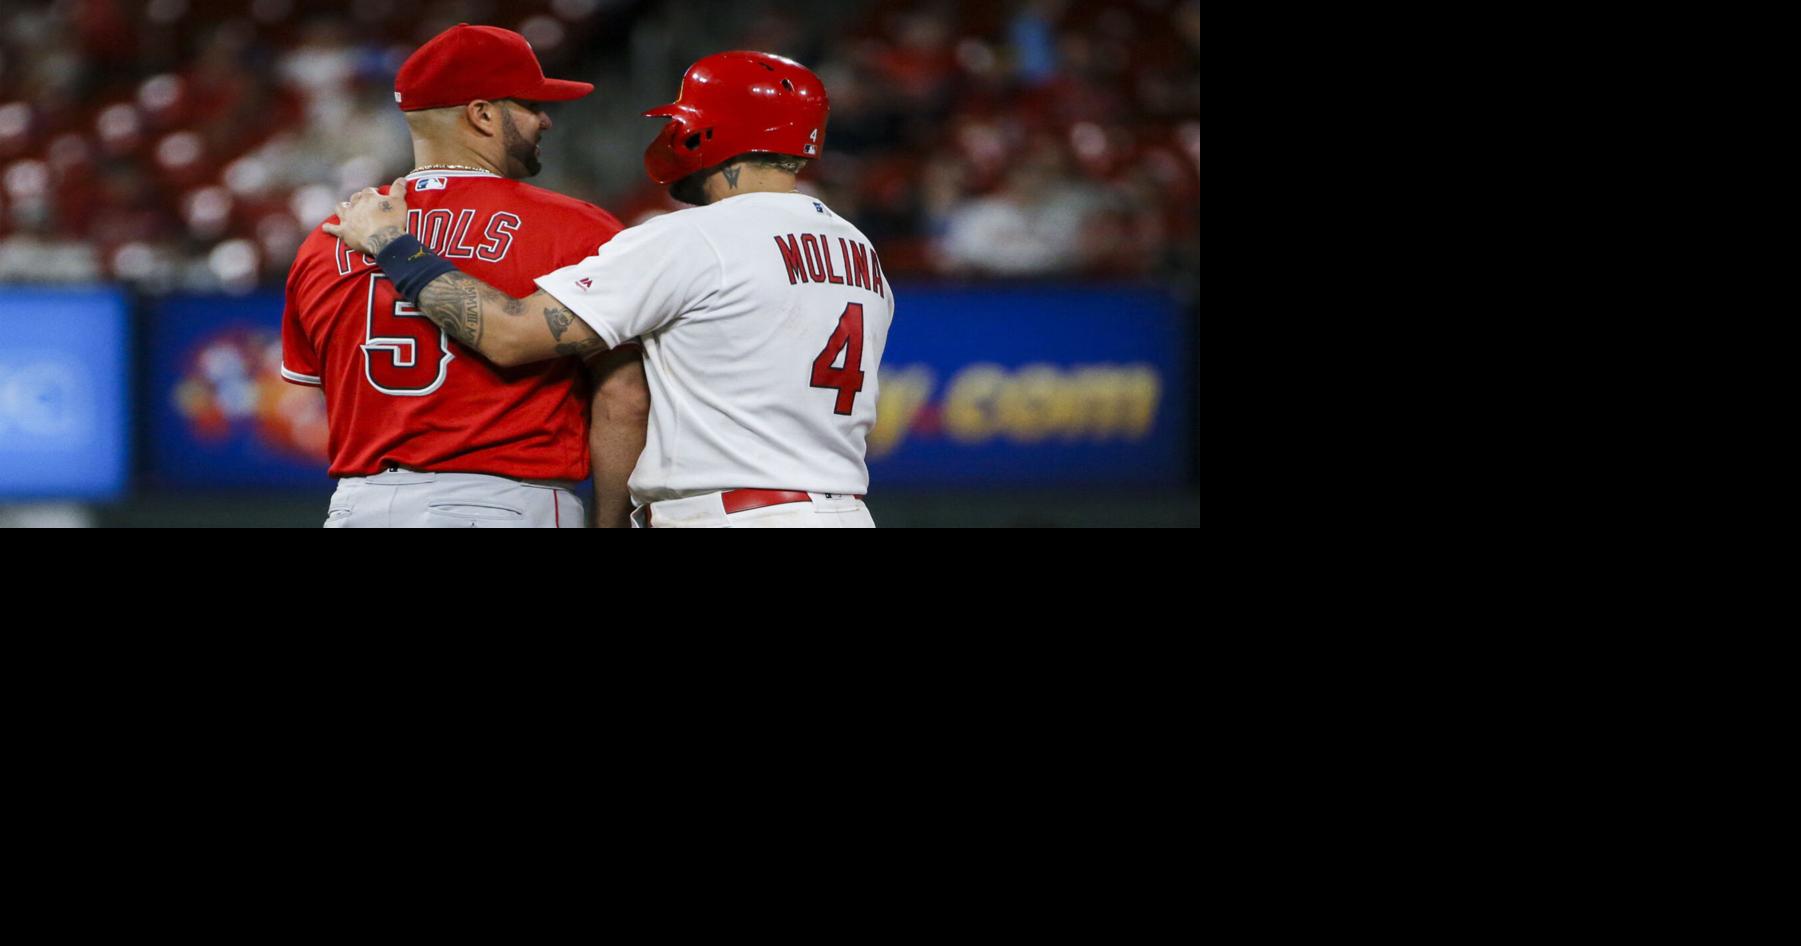 Pujols starting all over, disputes Angels' claims